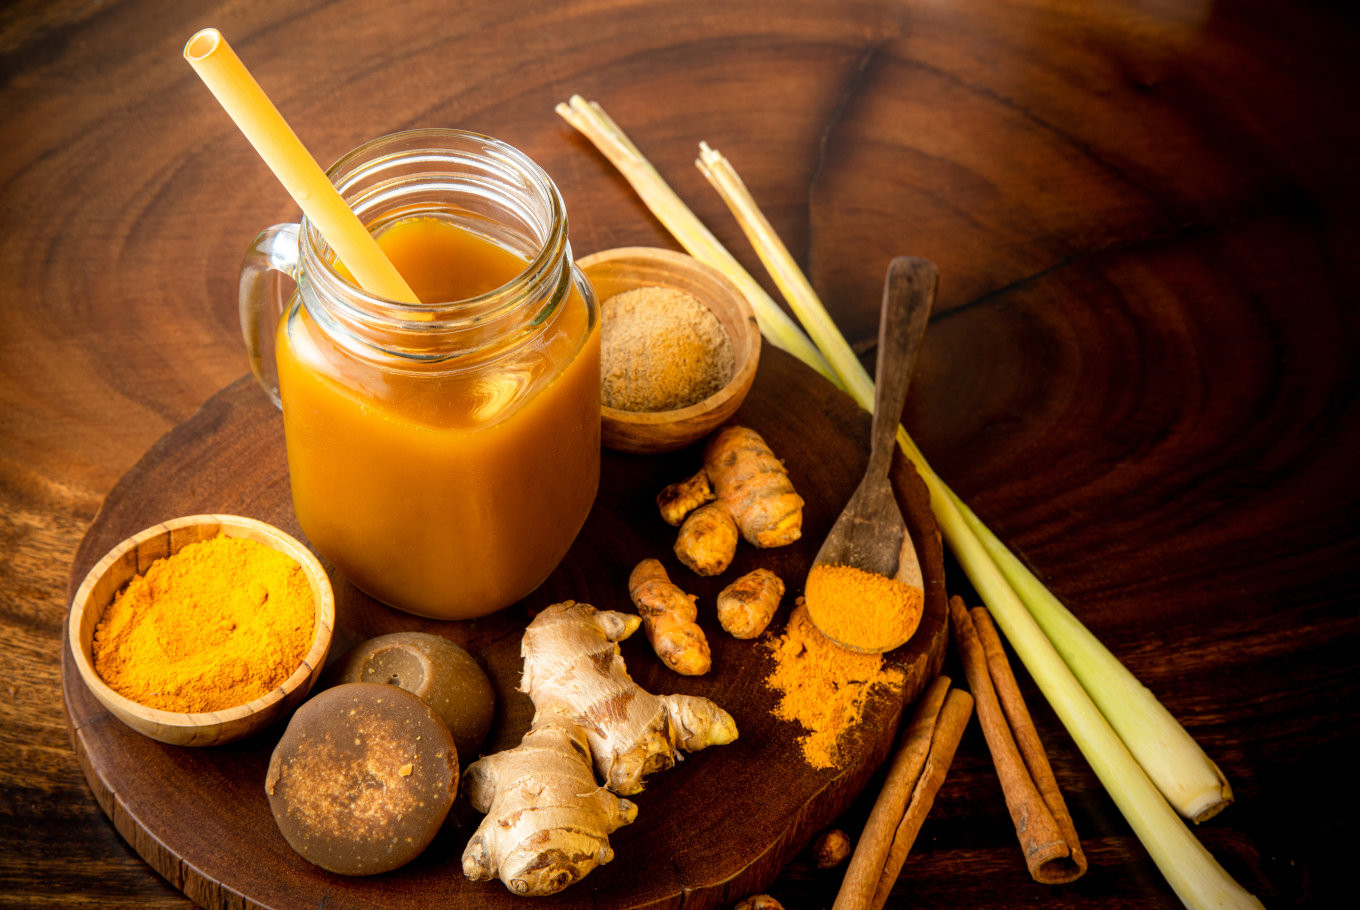 Best Eats: Selection Of Jamu To Boost Your Immune